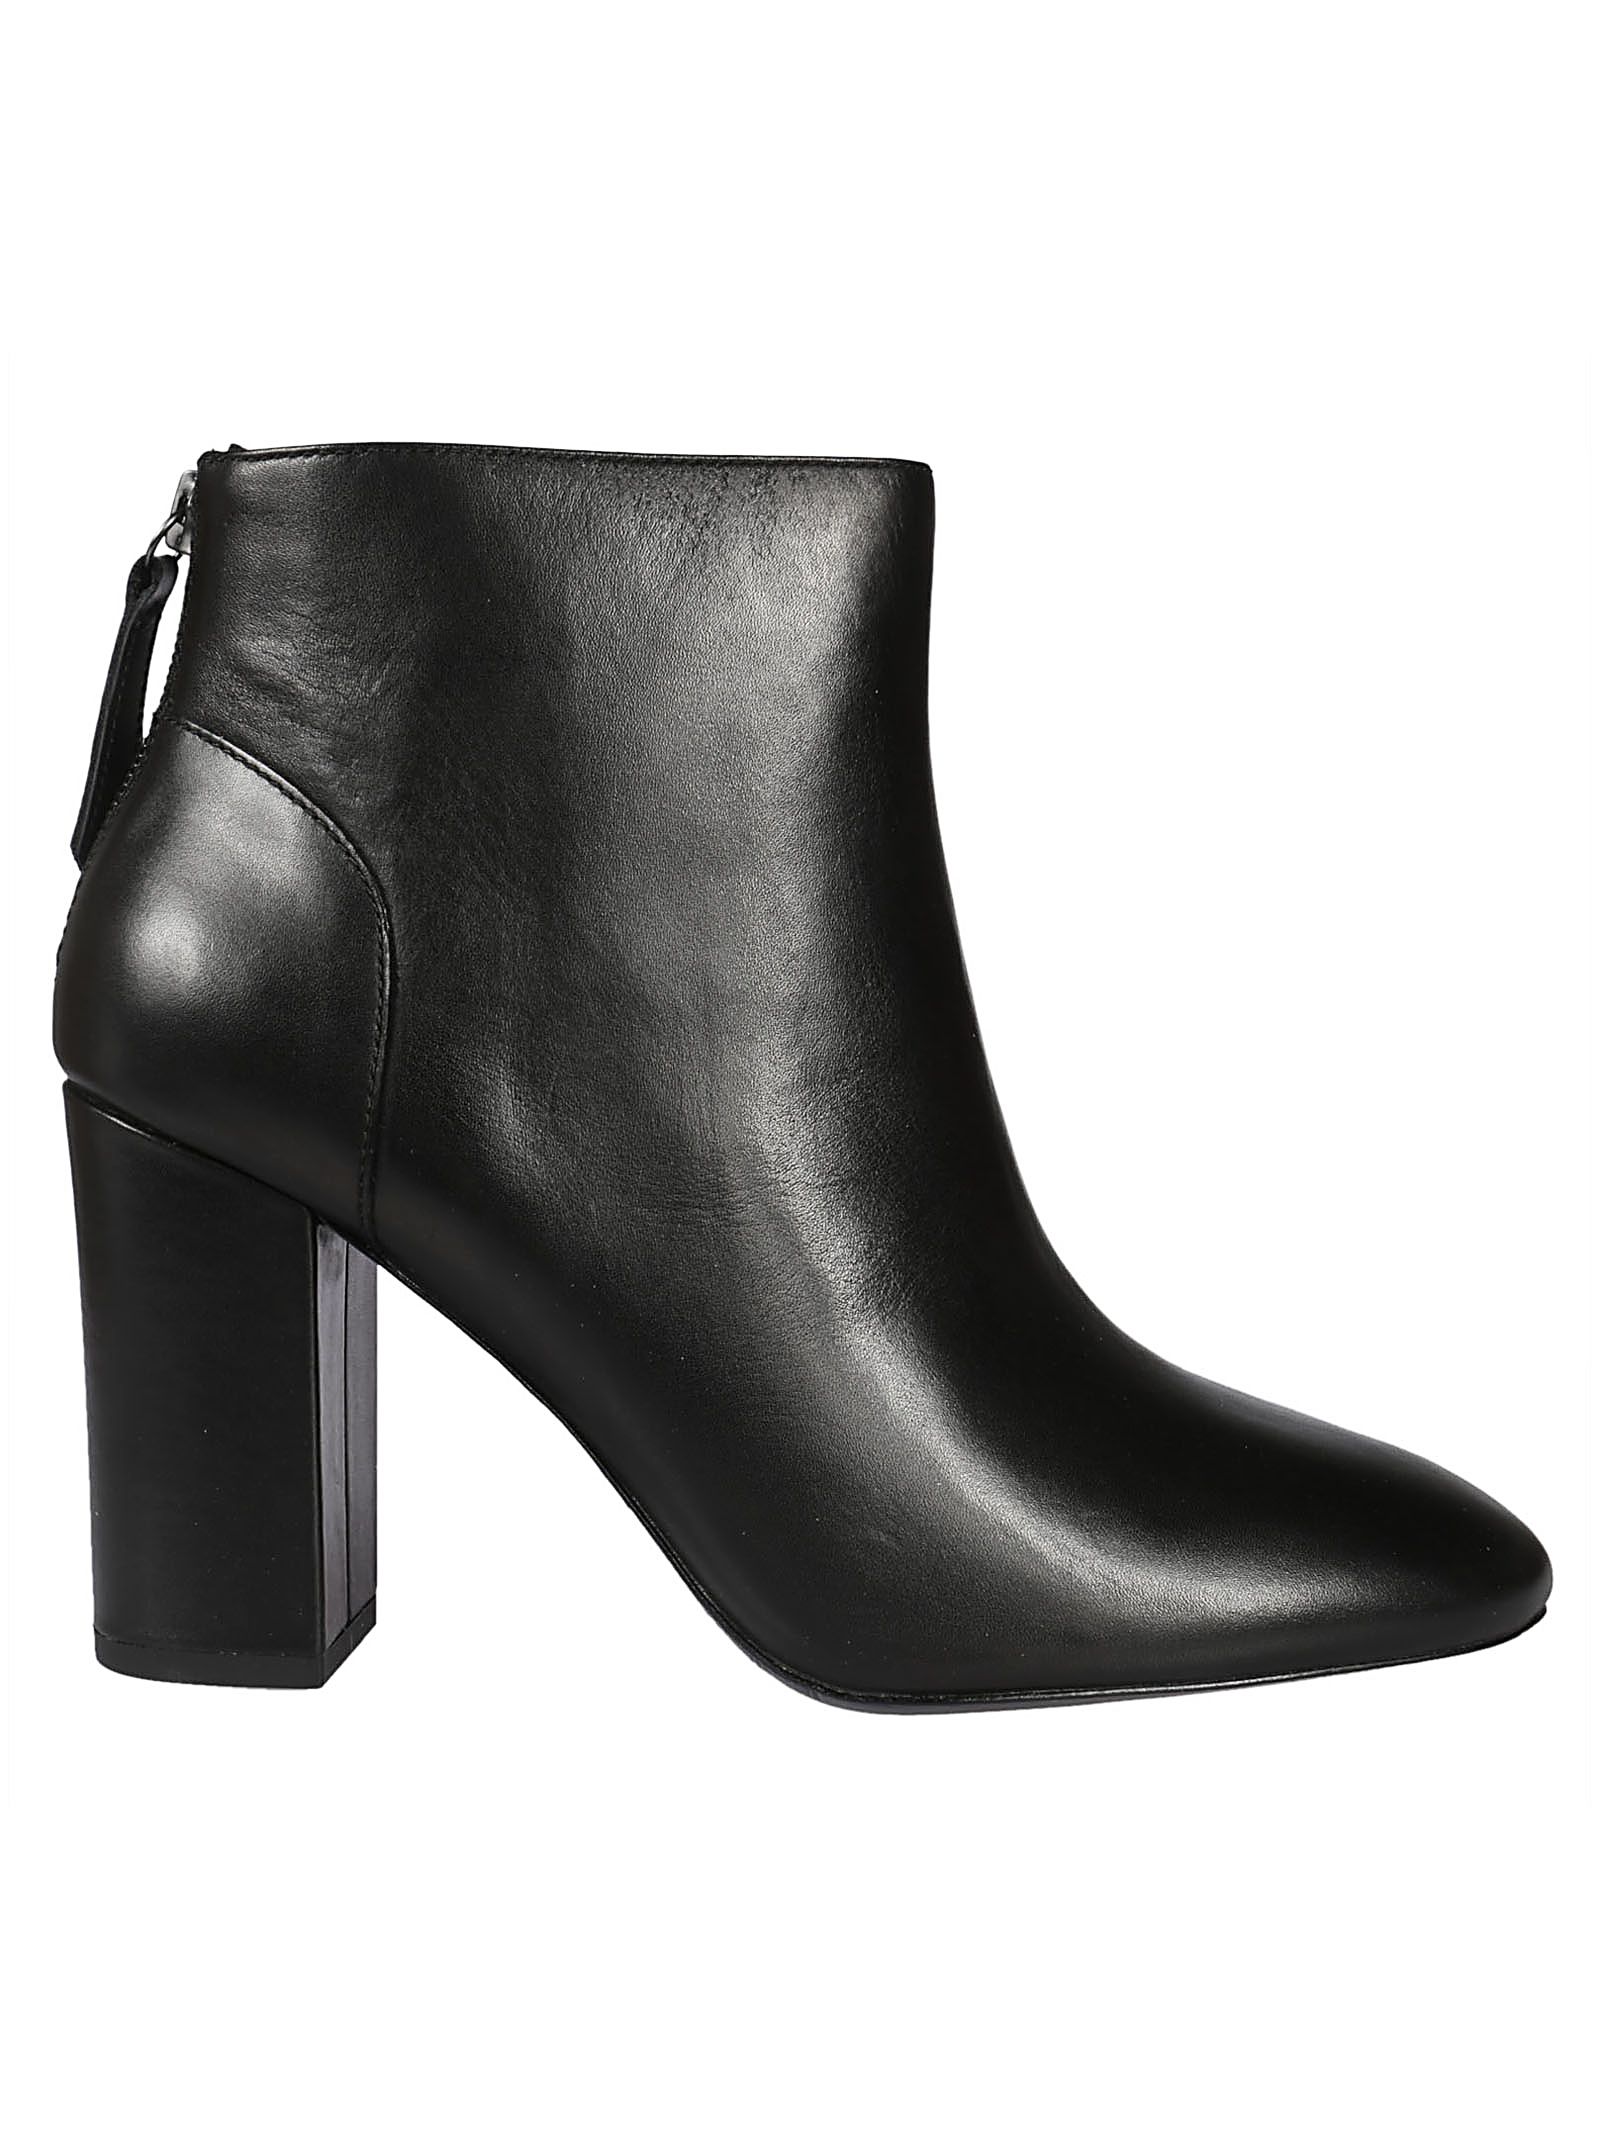 Ash Ash Leather Ankle Boots - 10664656 | italist